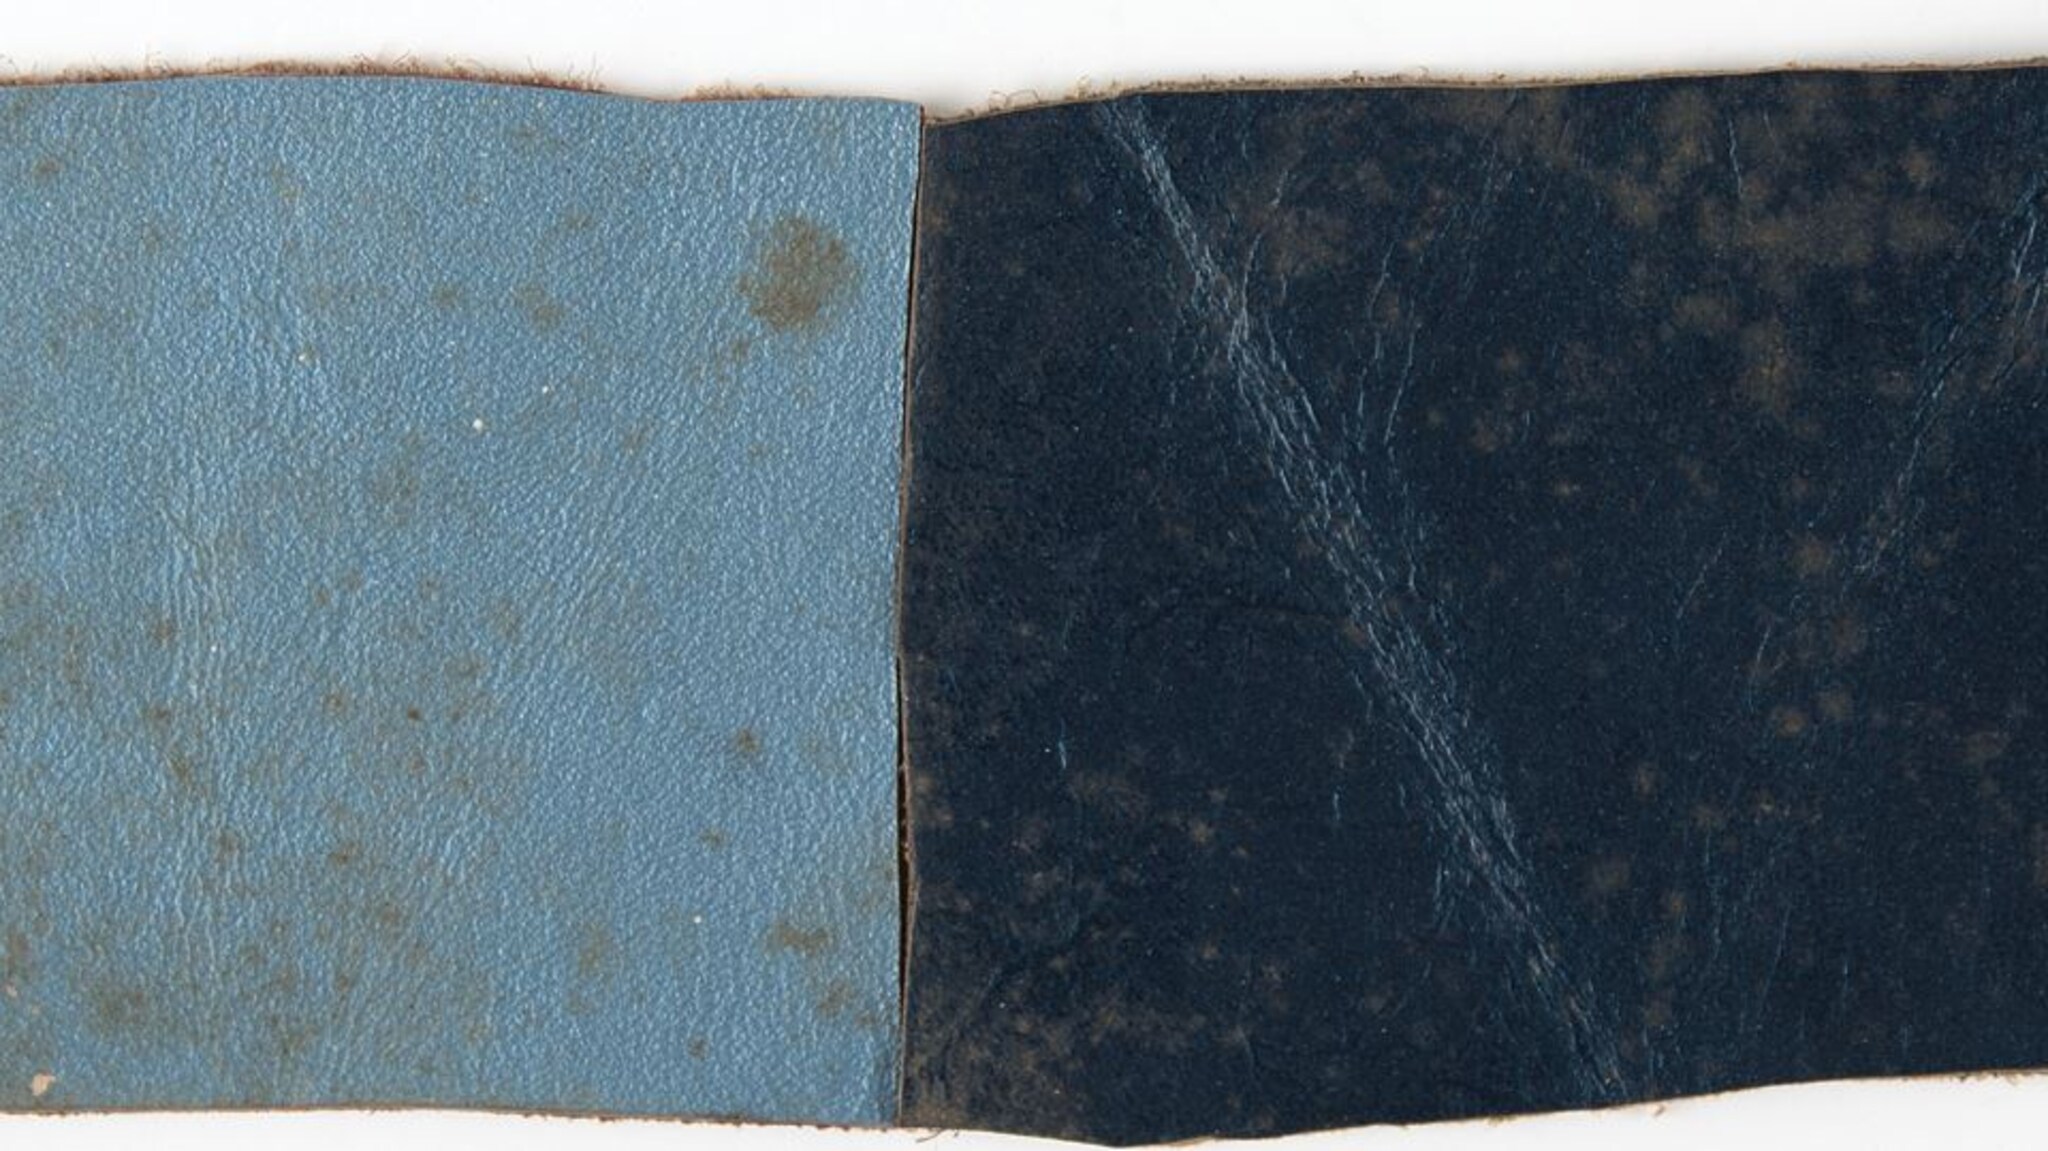 A piece of bloodstained skin from John F. Kennedy sold at auction for $46,865